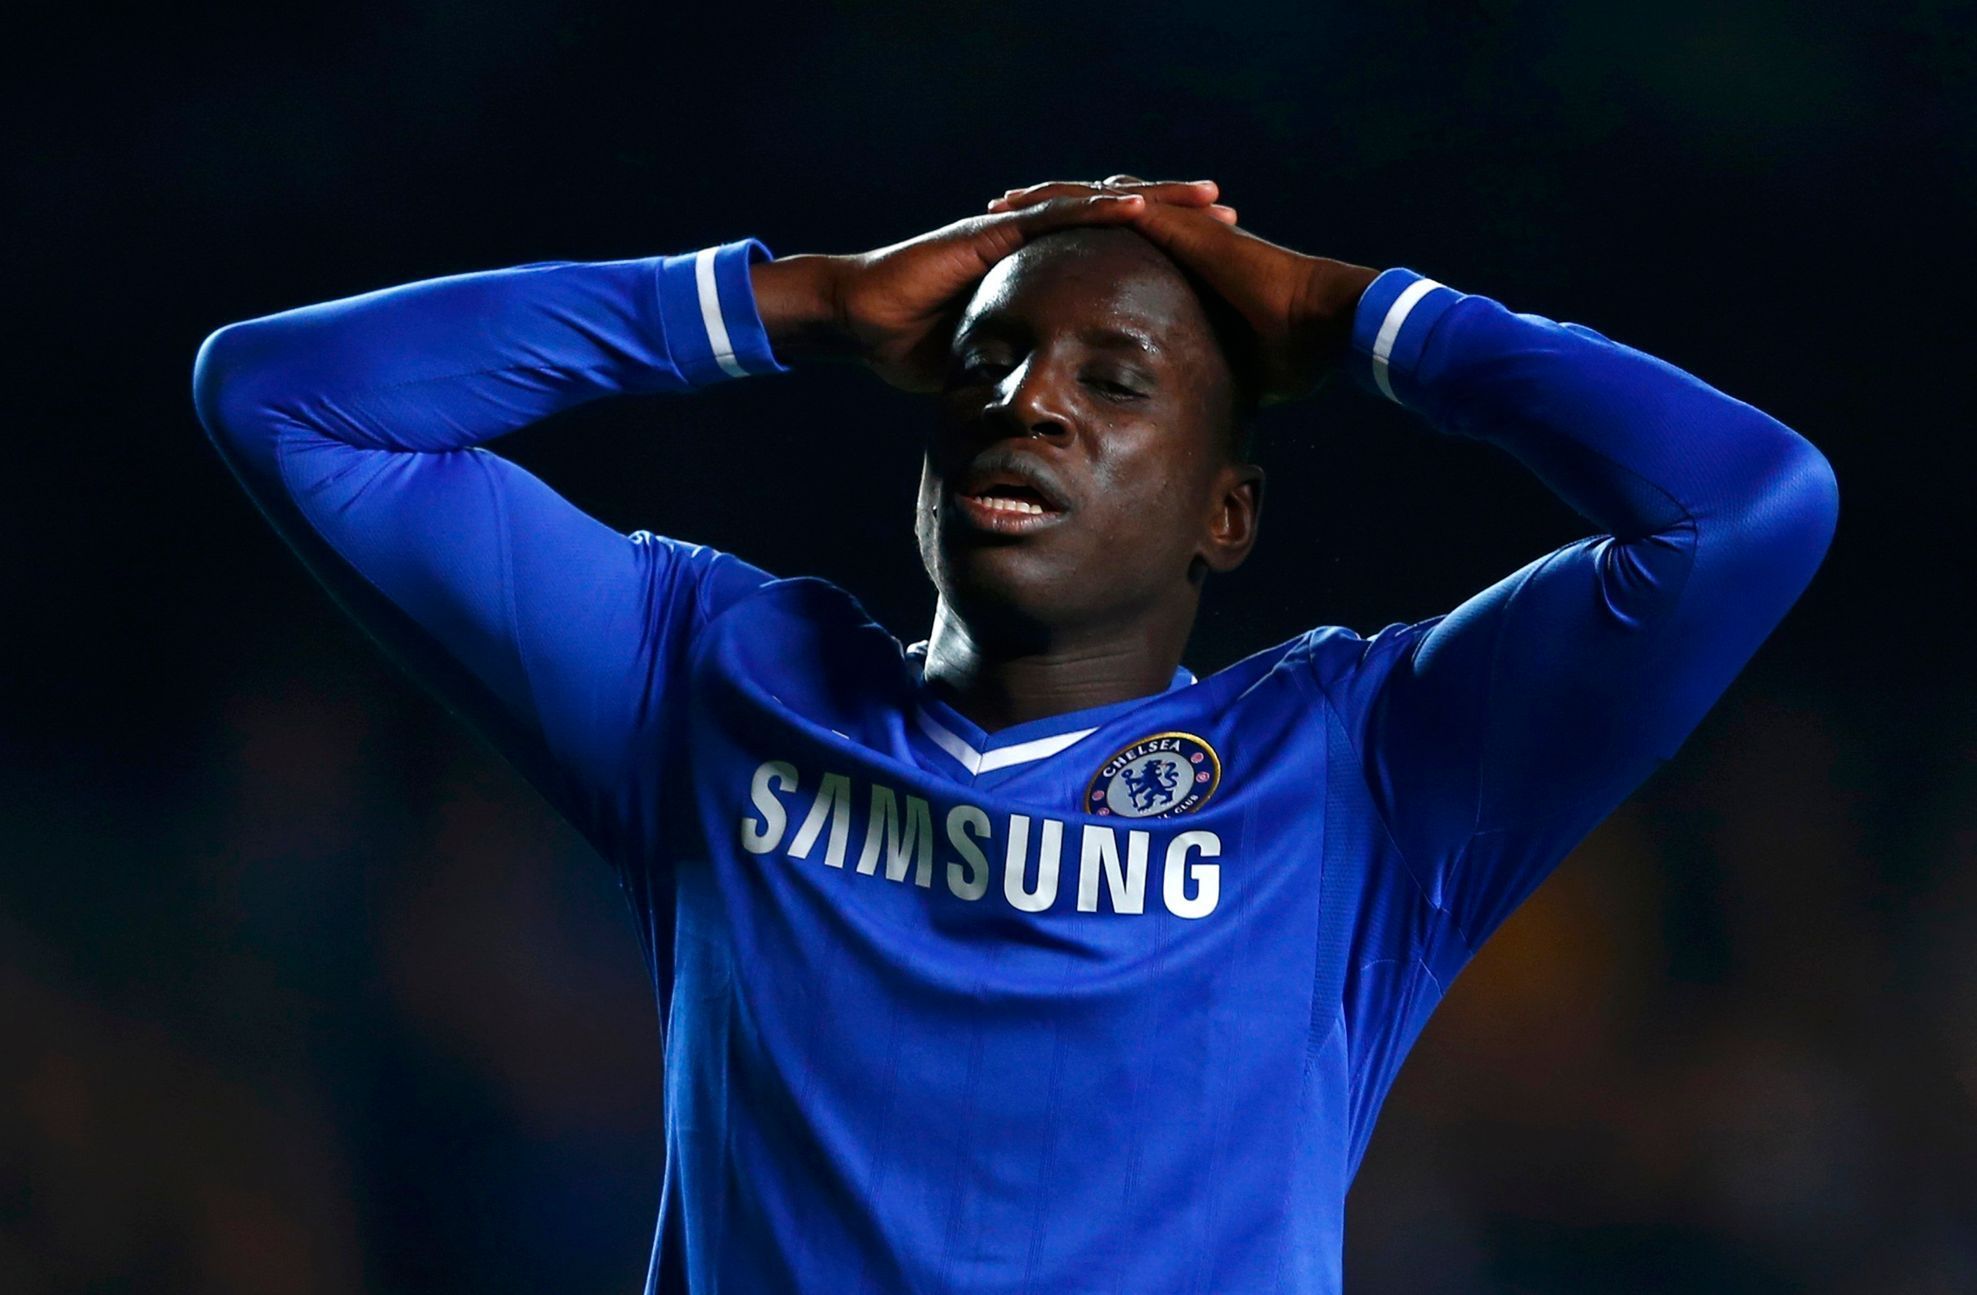 Chelsea's Demba Ba reacts during their team's Champions League semi-final second leg soccer match against Atletico Madrid at Stamford Bridge Stadium in London